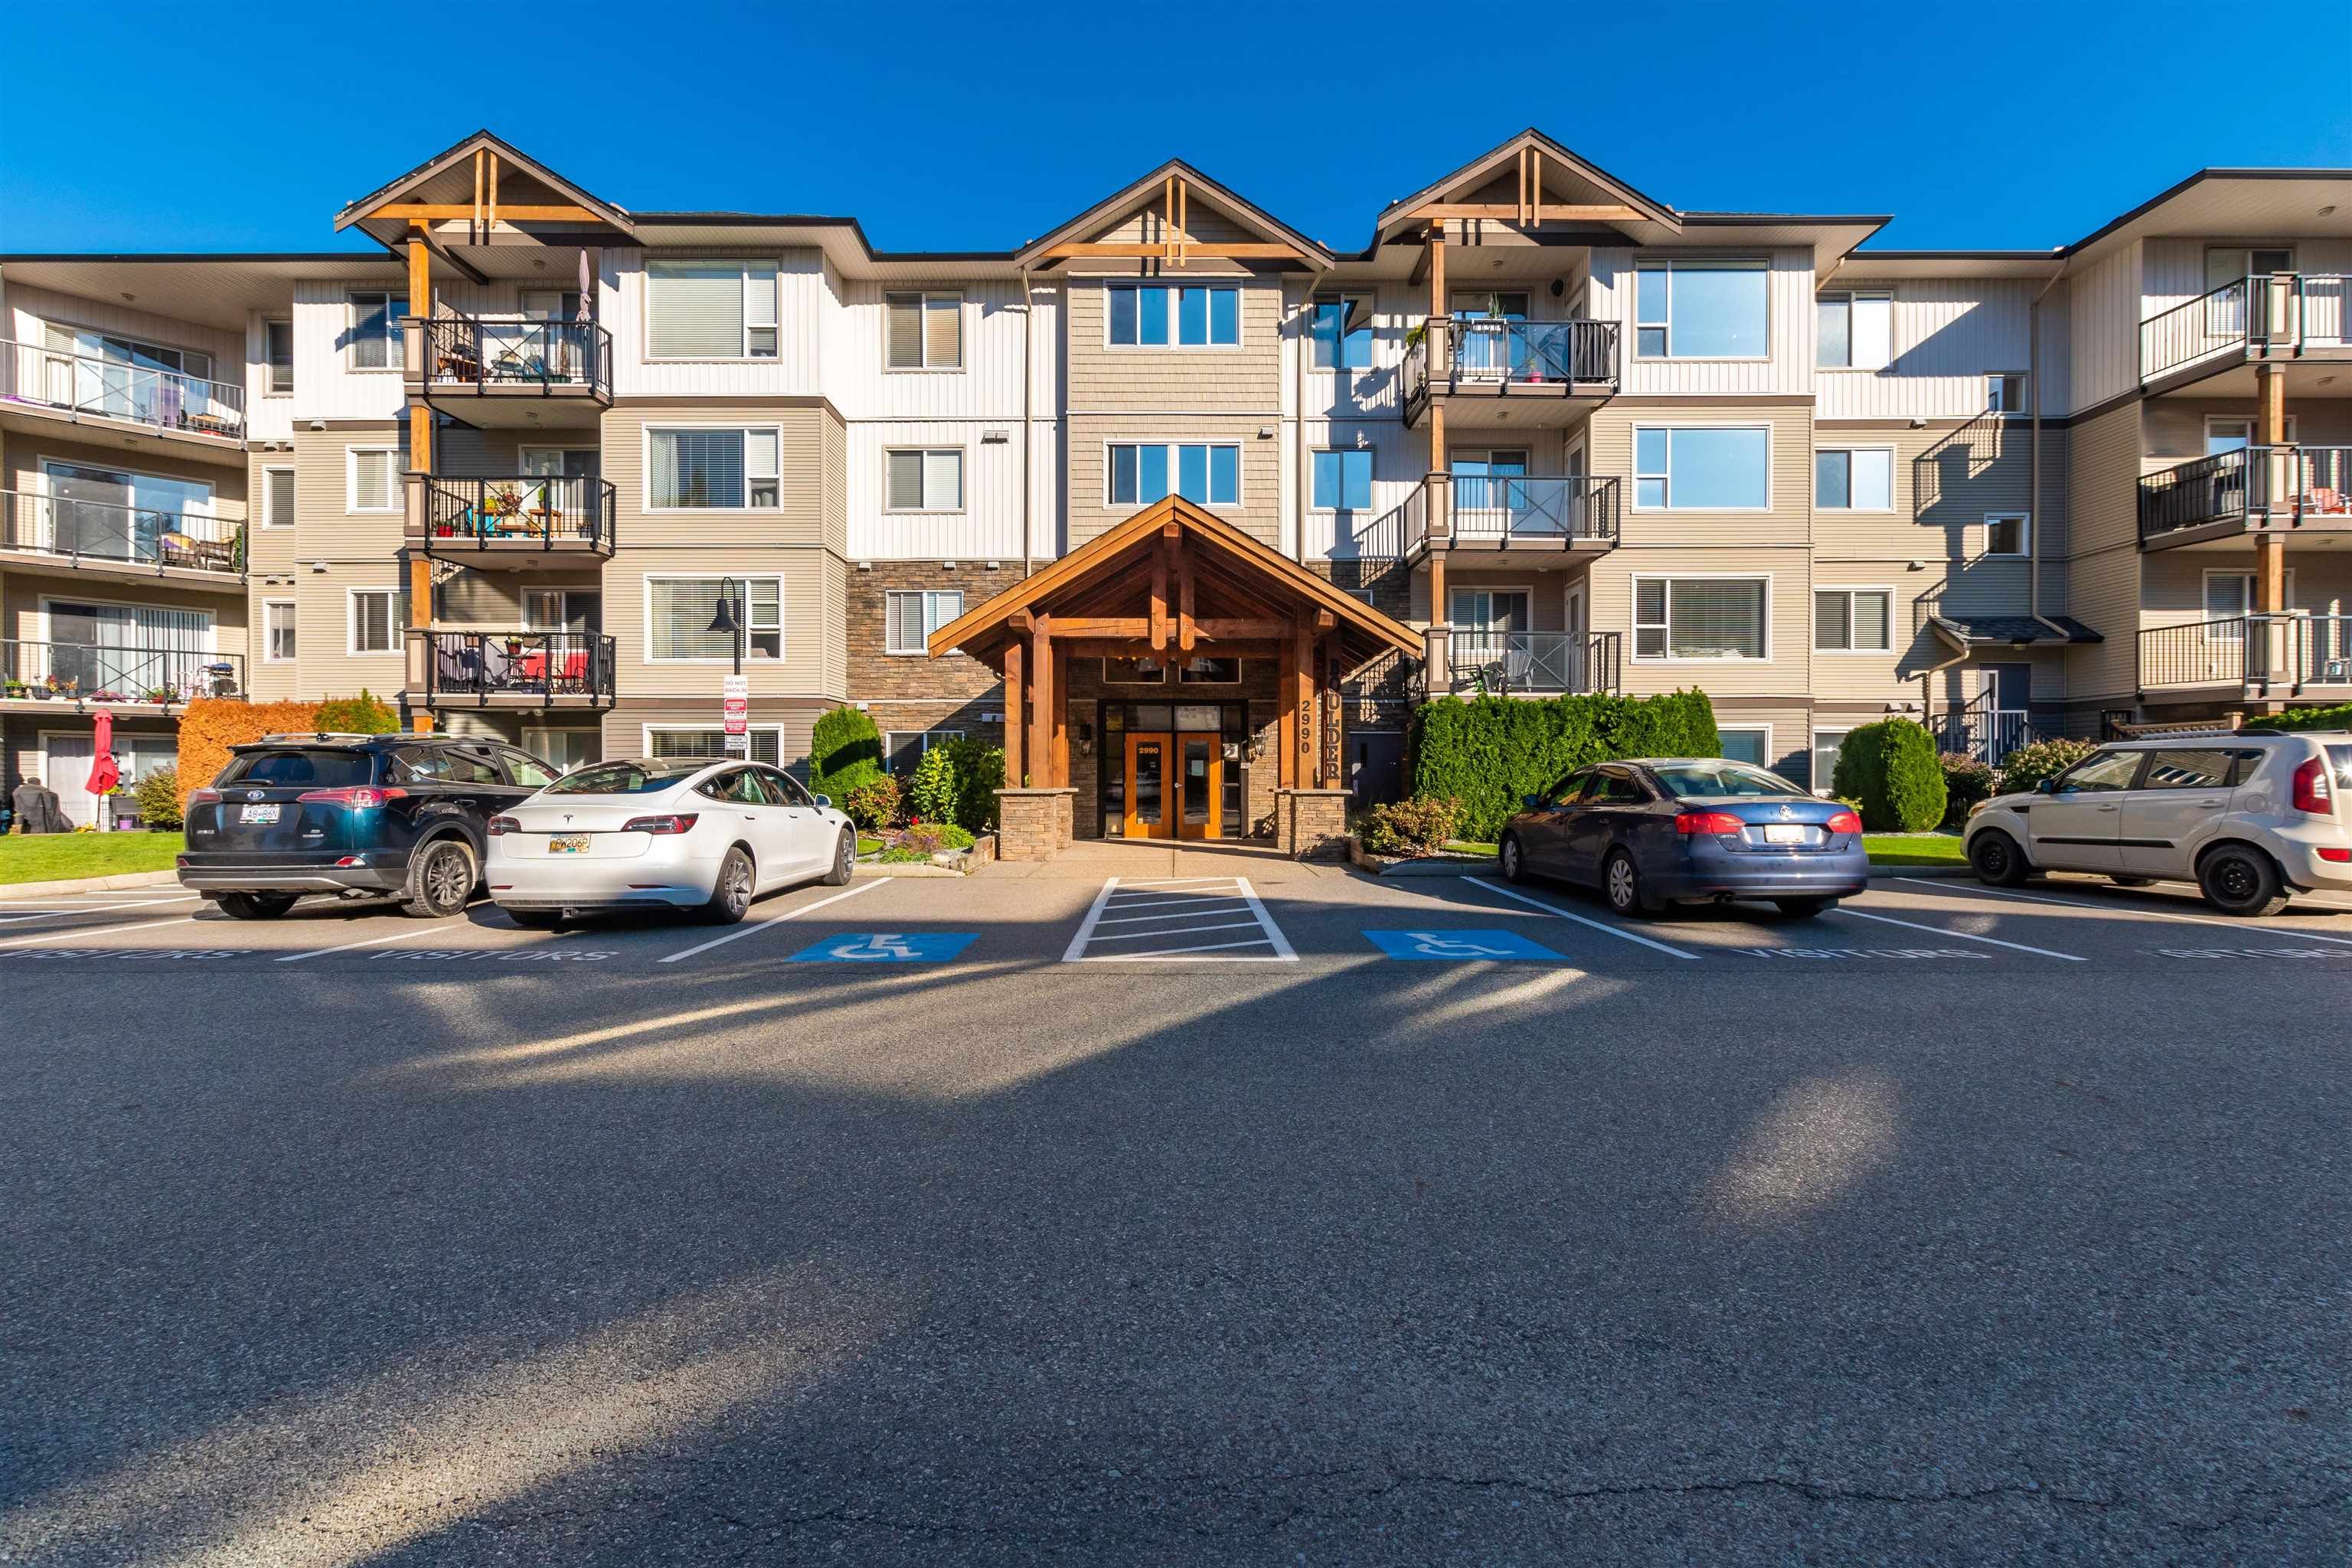 Main Photo: 311 2990 BOULDER STREET in : Abbotsford West Condo for sale : MLS®# R2624735